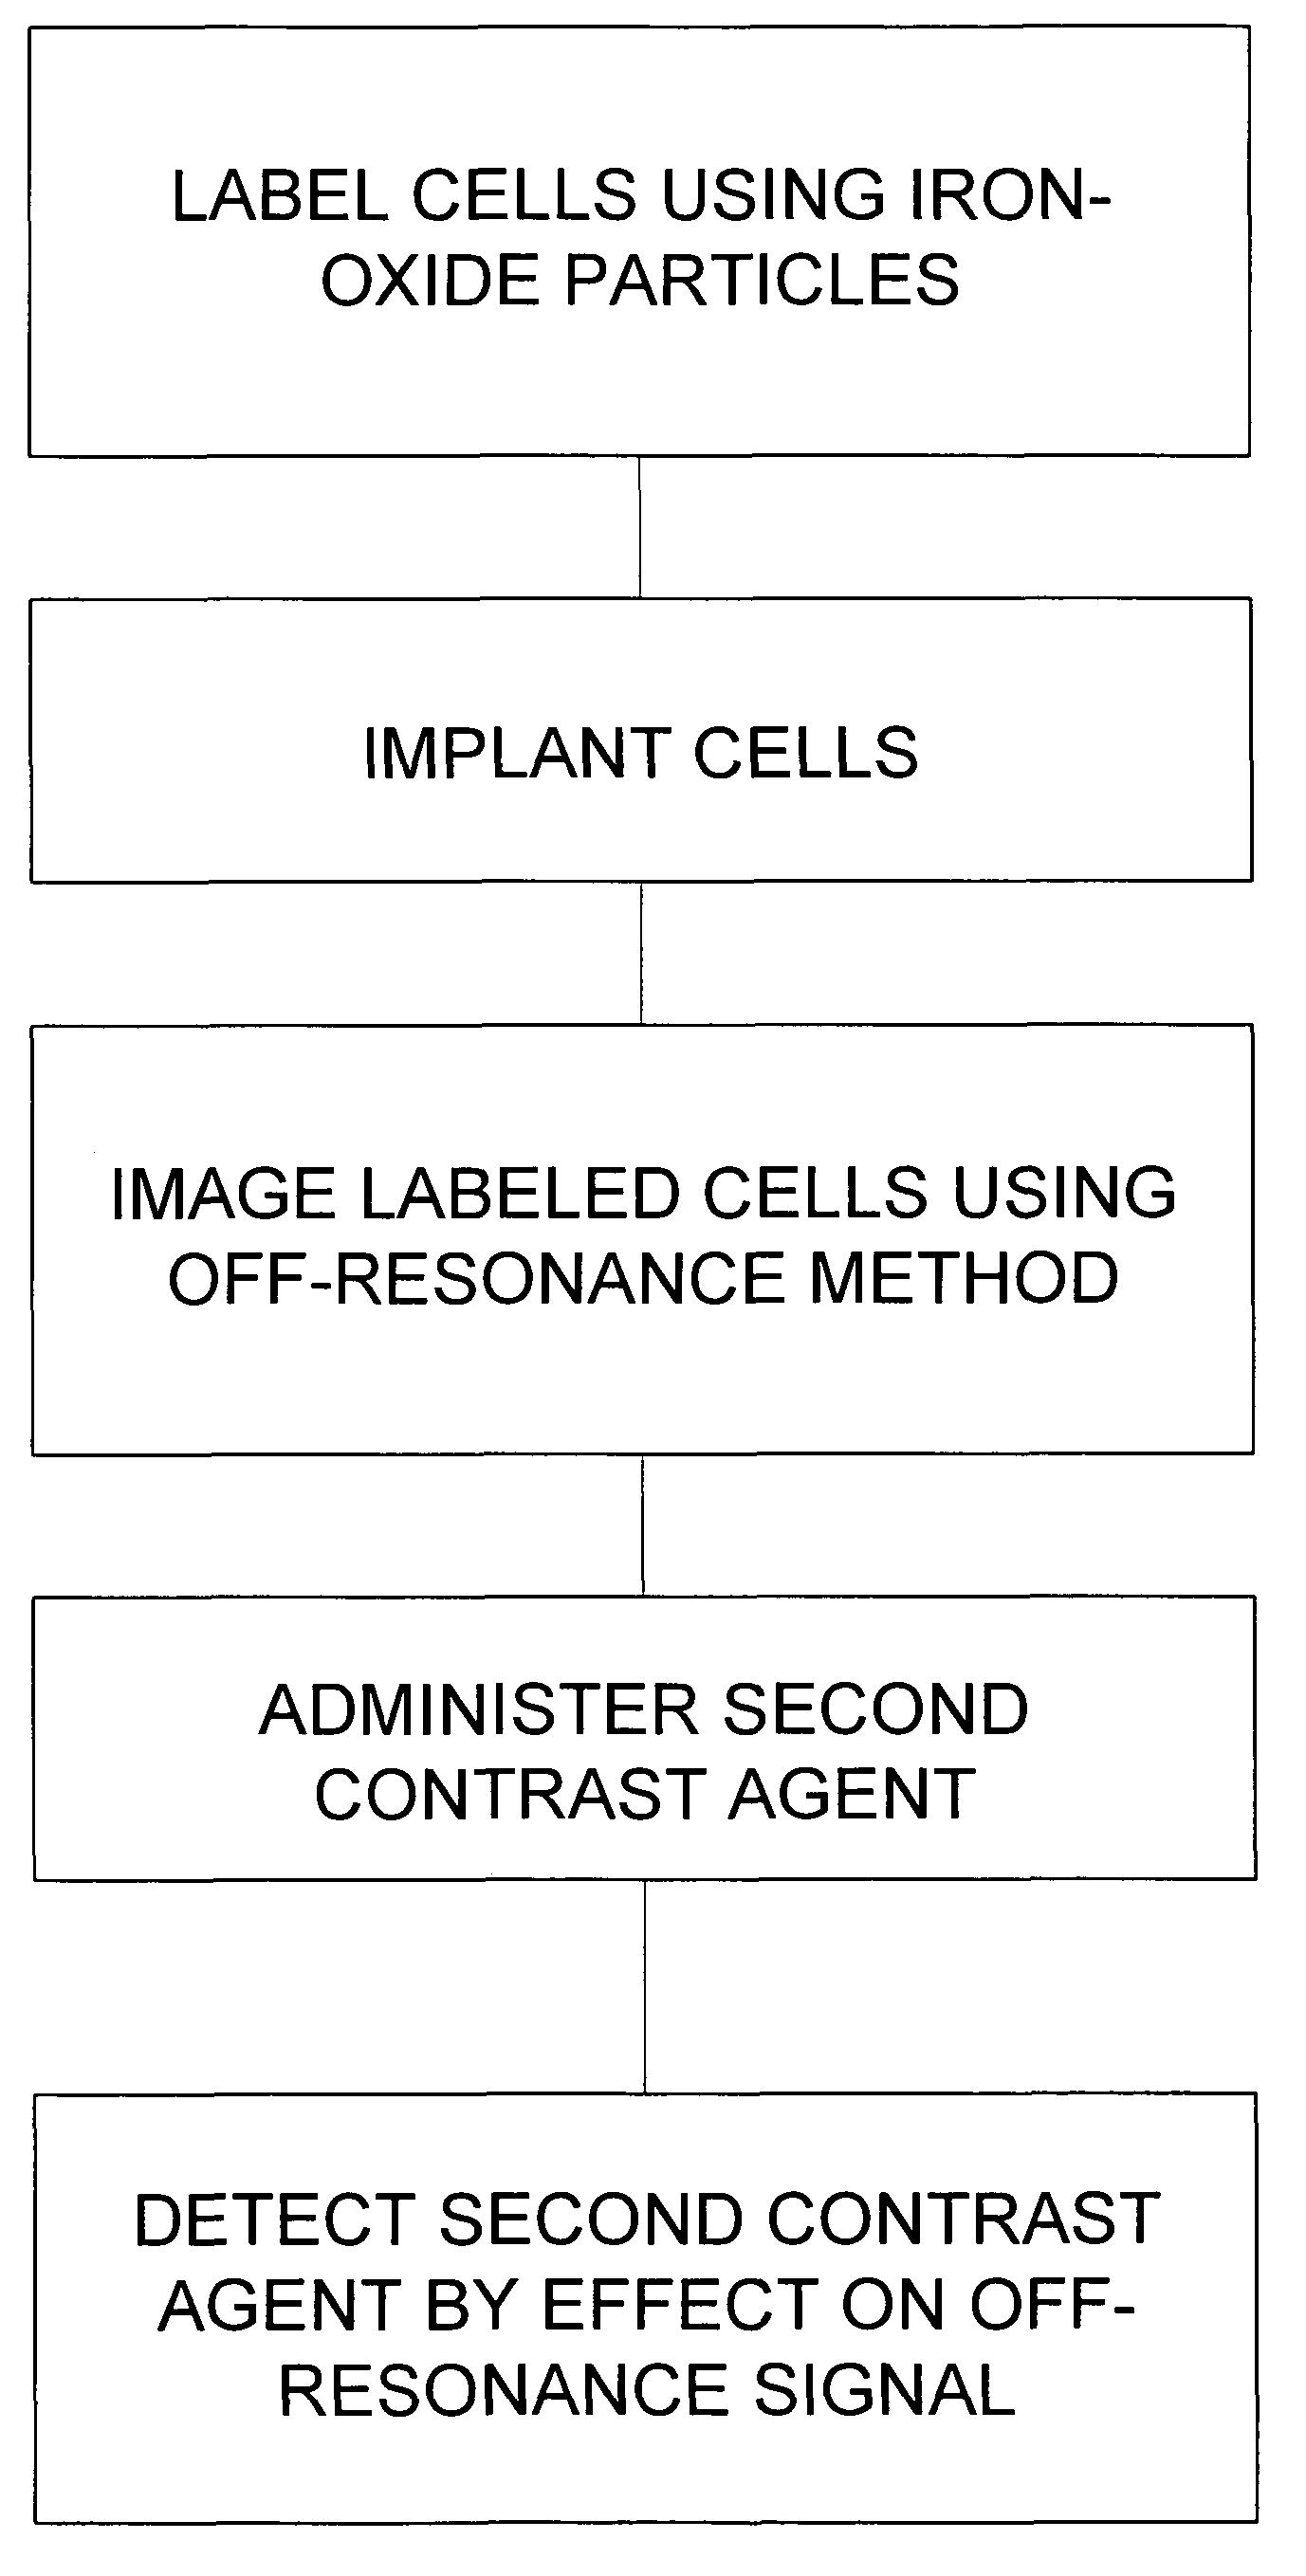 Method of off-resonance detection using complementary MR contrast agents